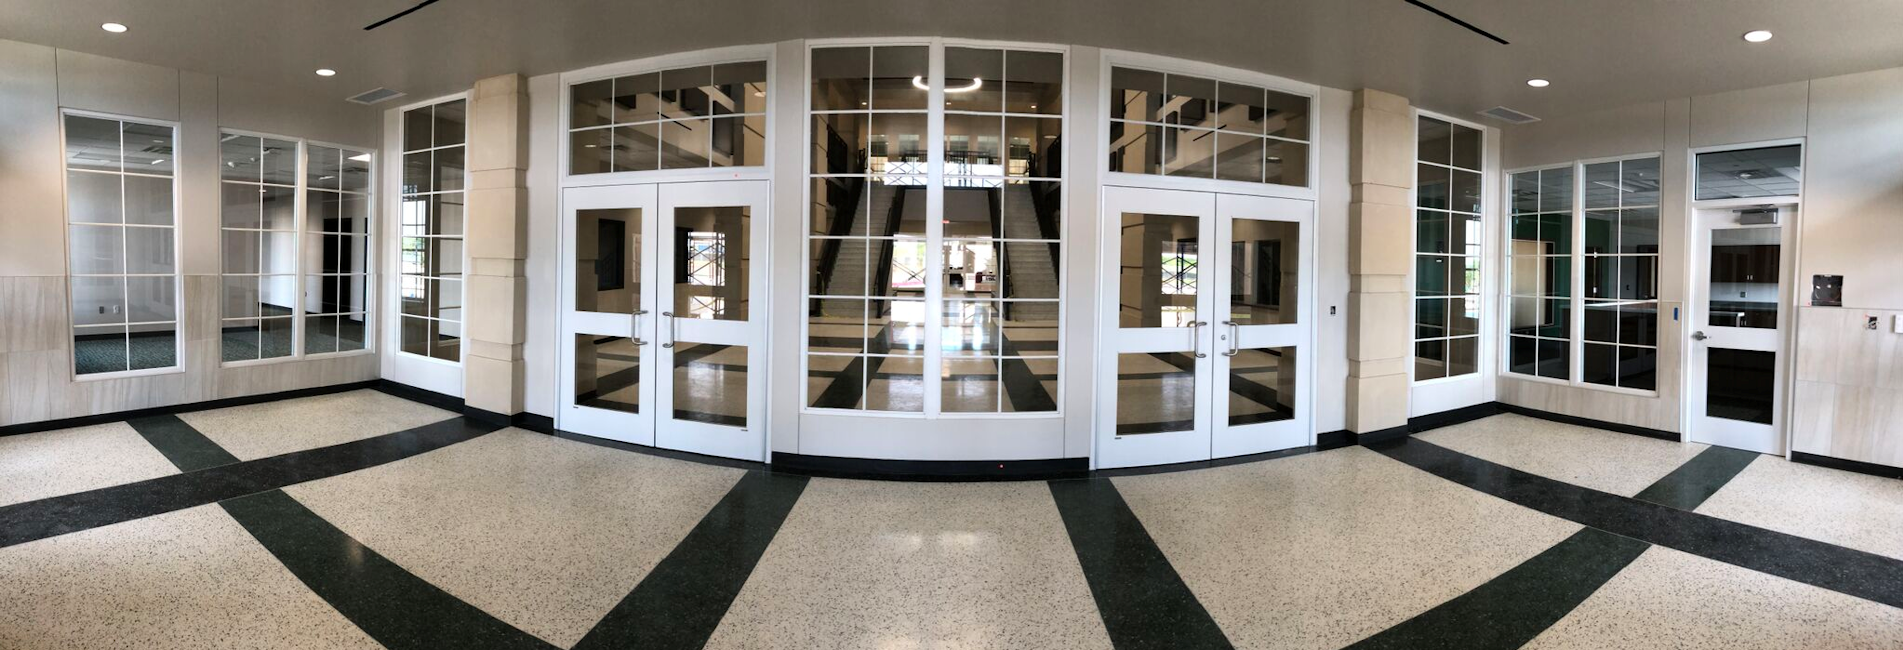 Custom Glass Installer Euless Texas Dallas Fort Worth Glass & Mirror Installation | Residential Glass | Commercial Glass & Glazing | AB Glass &